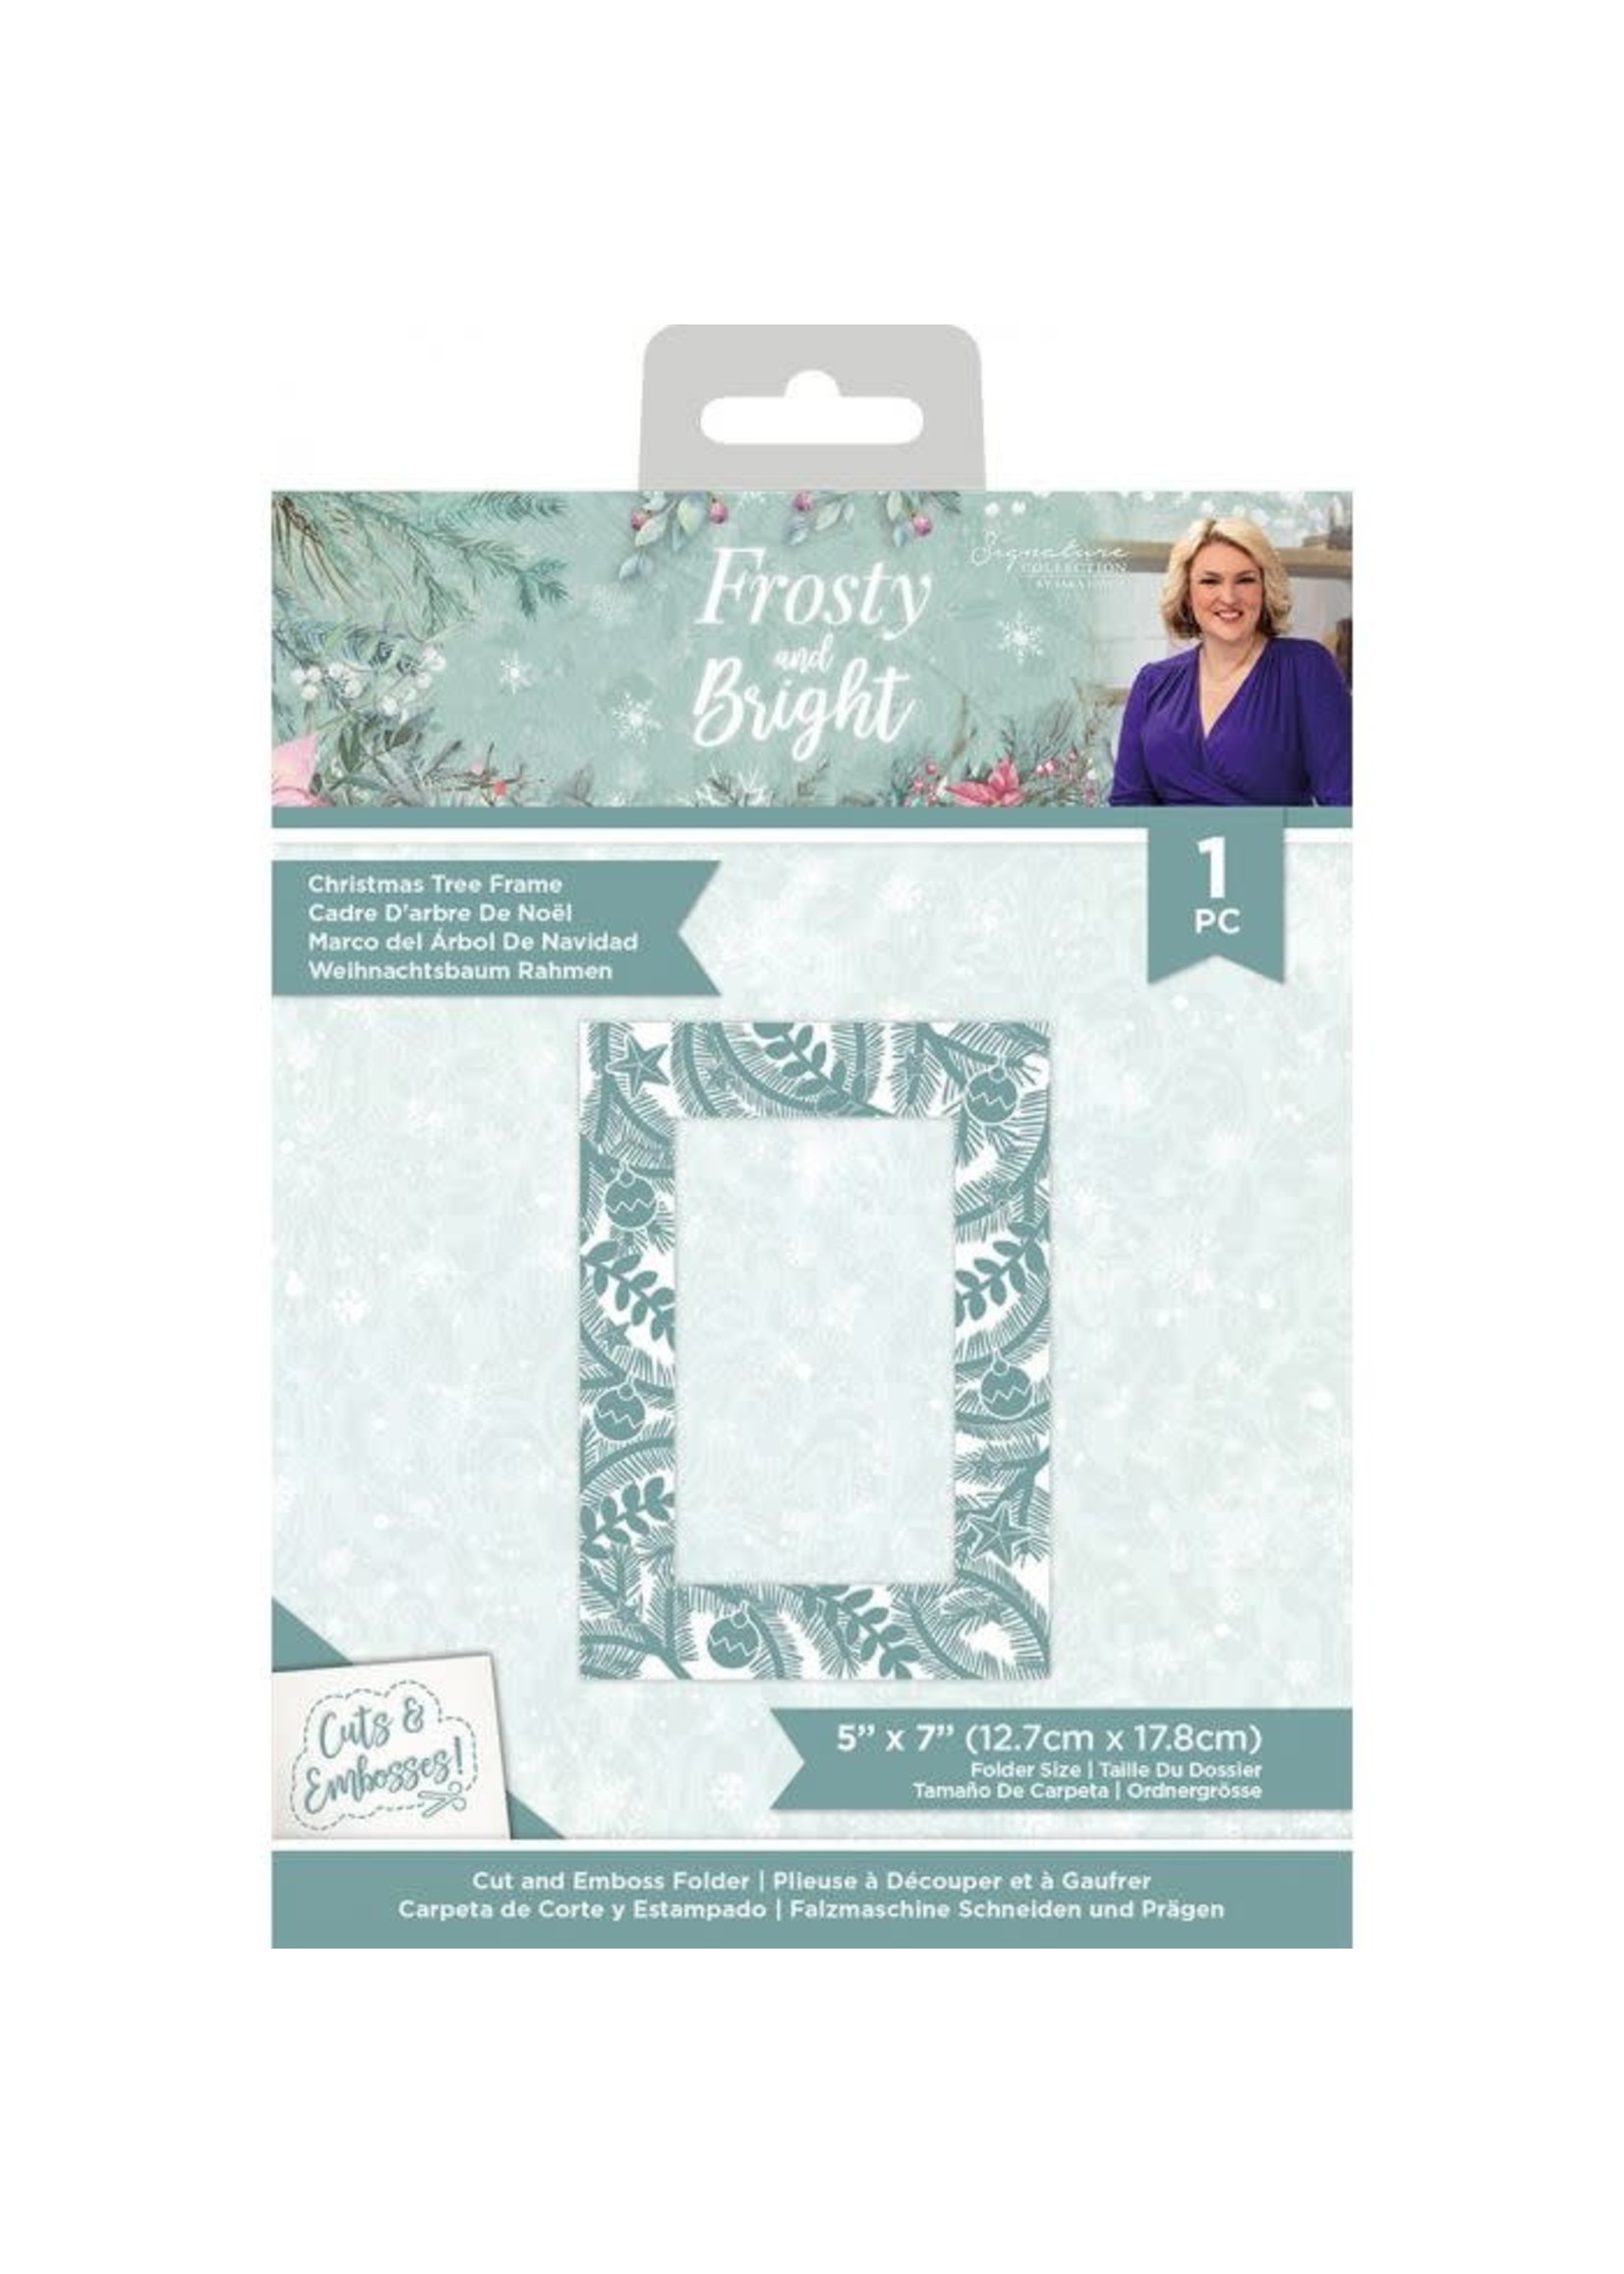 Crafter's Companion Christmas Tree Frame Die